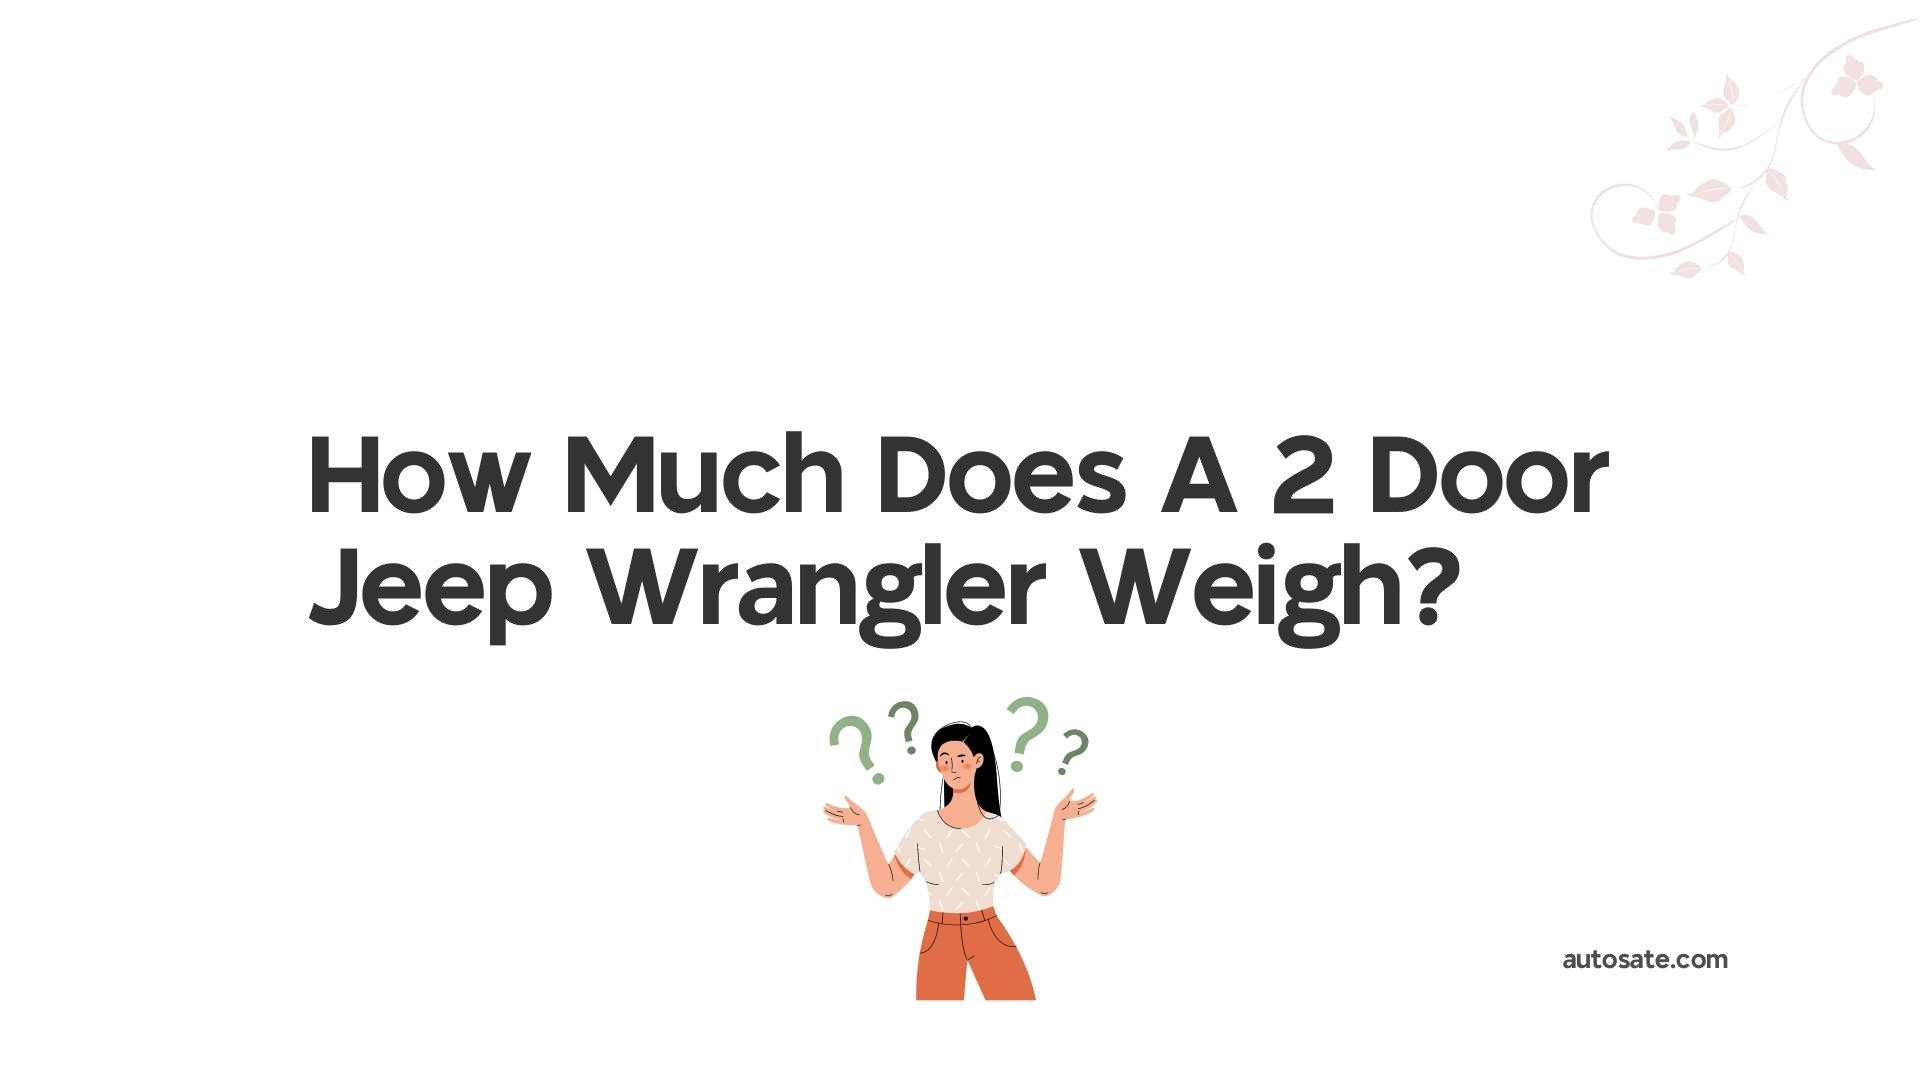 How Much Does A 2 Door Jeep Wrangler Weigh?